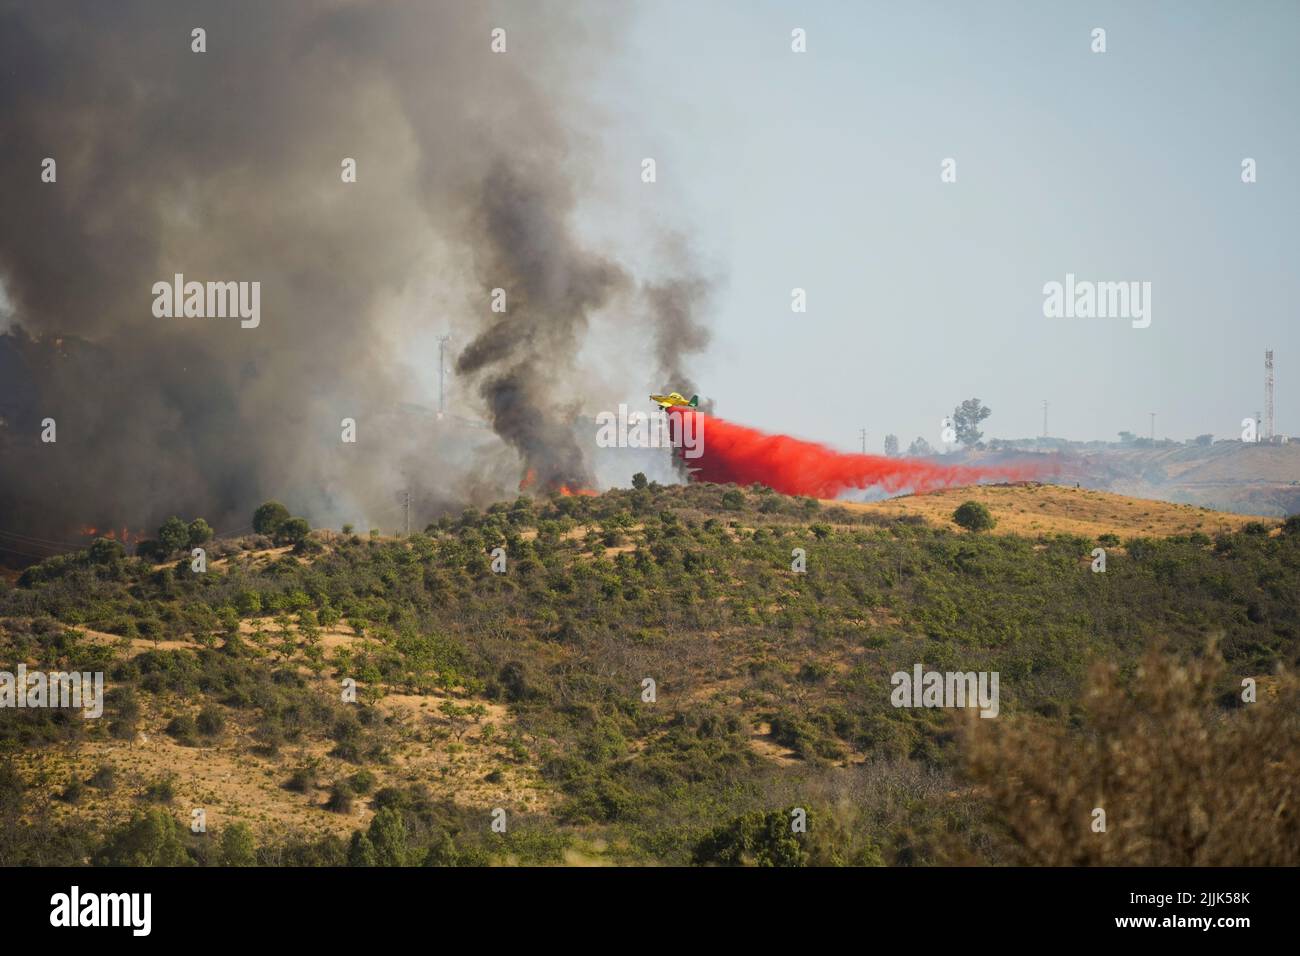 Plane dropping red flame retardant on wildfire in Mijas, Andalucia, Spain. Stock Photo